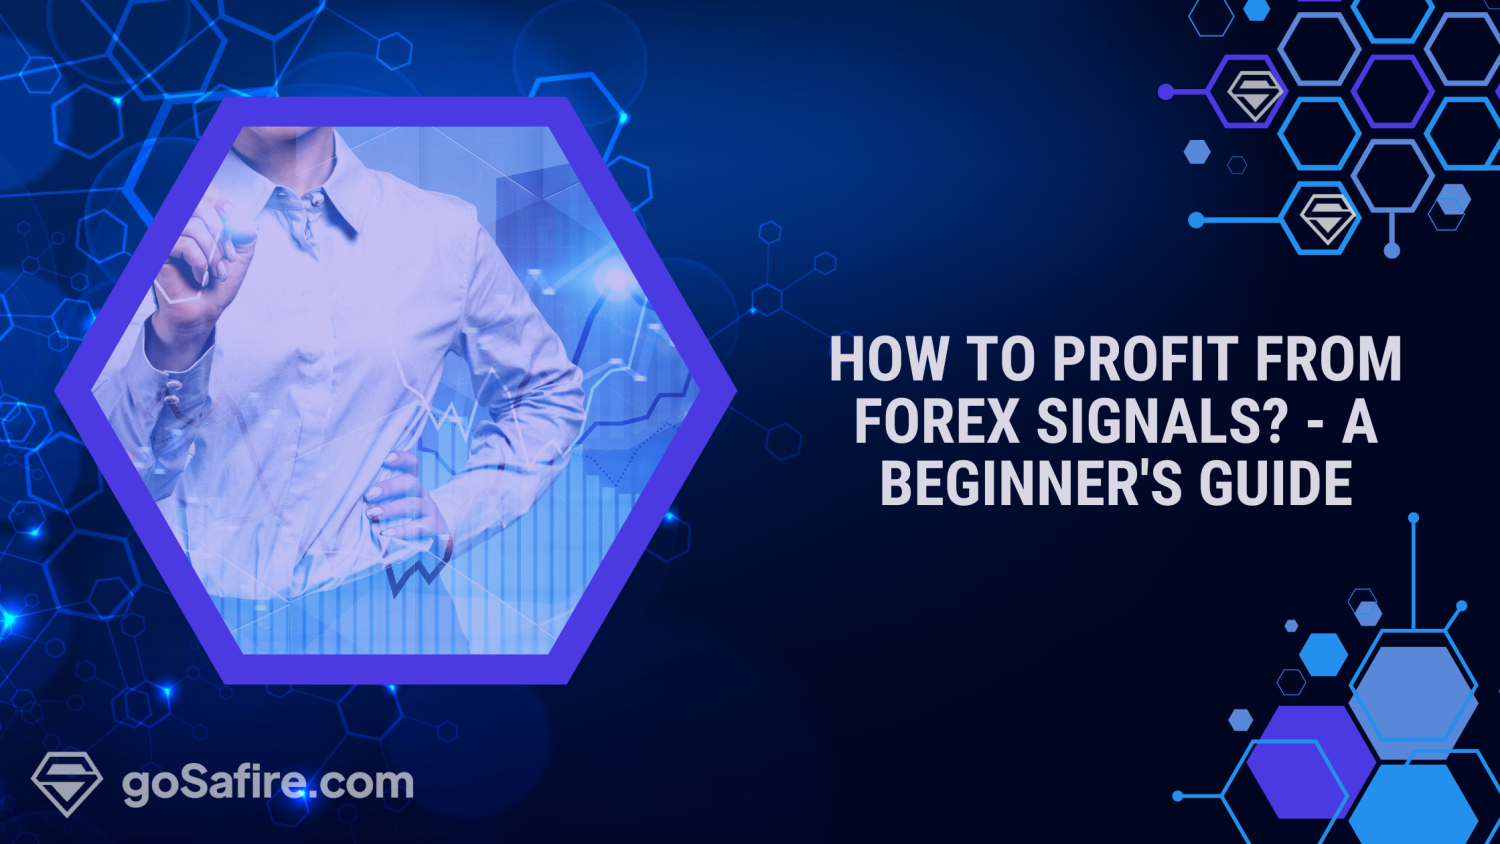 How to profit from forex signals? – a beginner’s guide